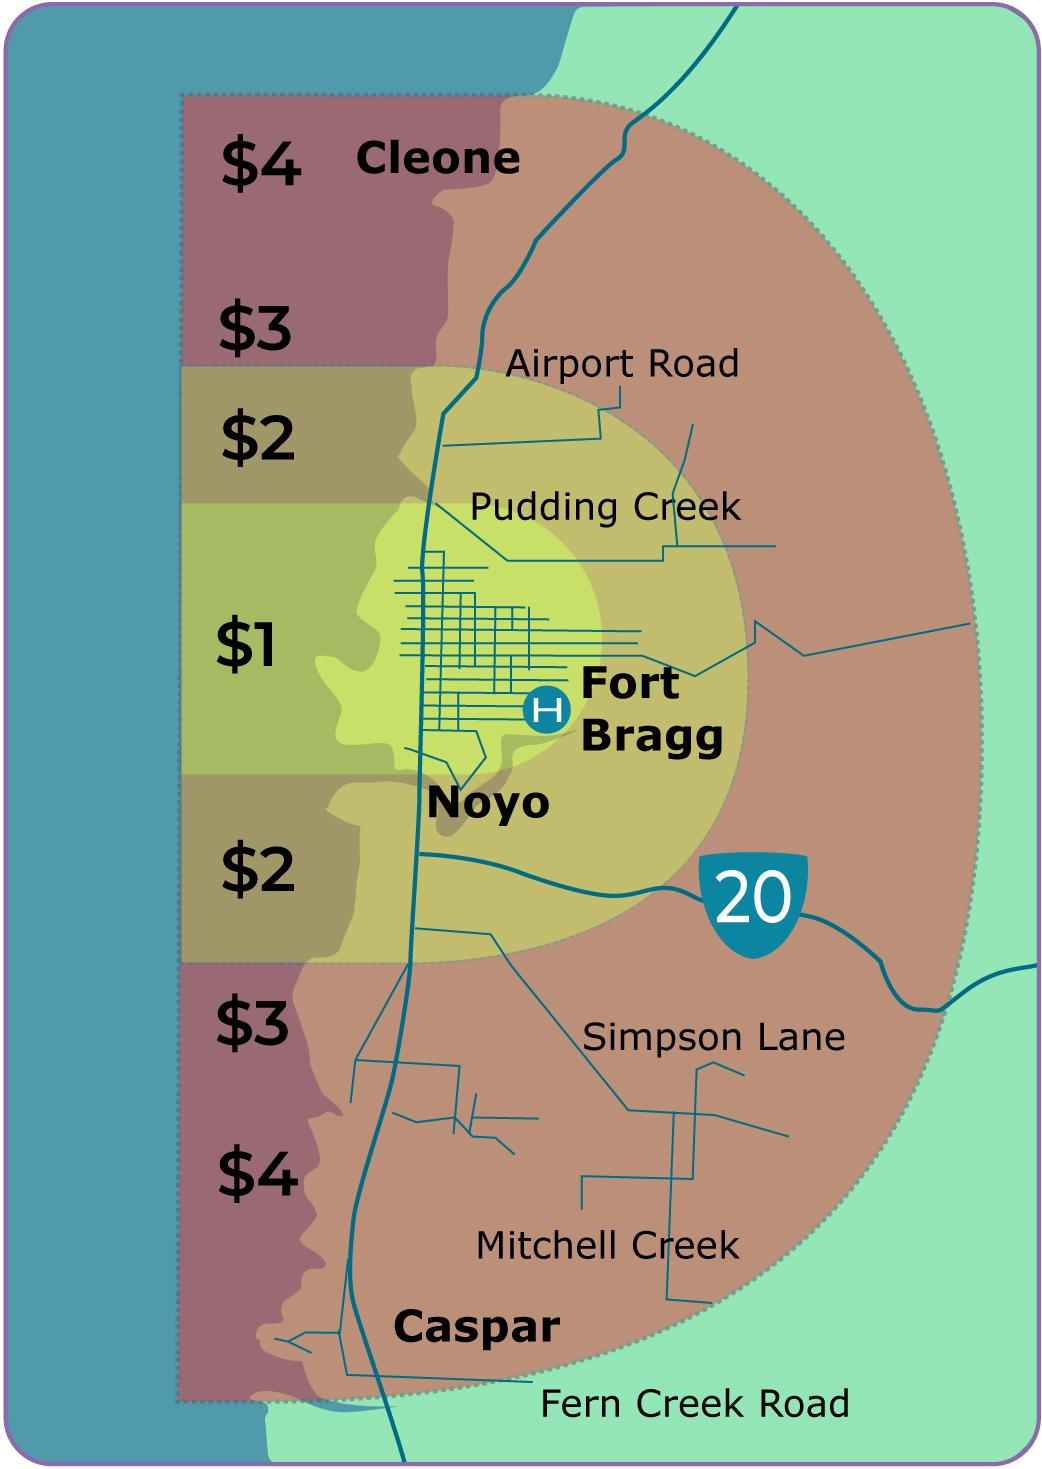 Bus Service Range and Pricing